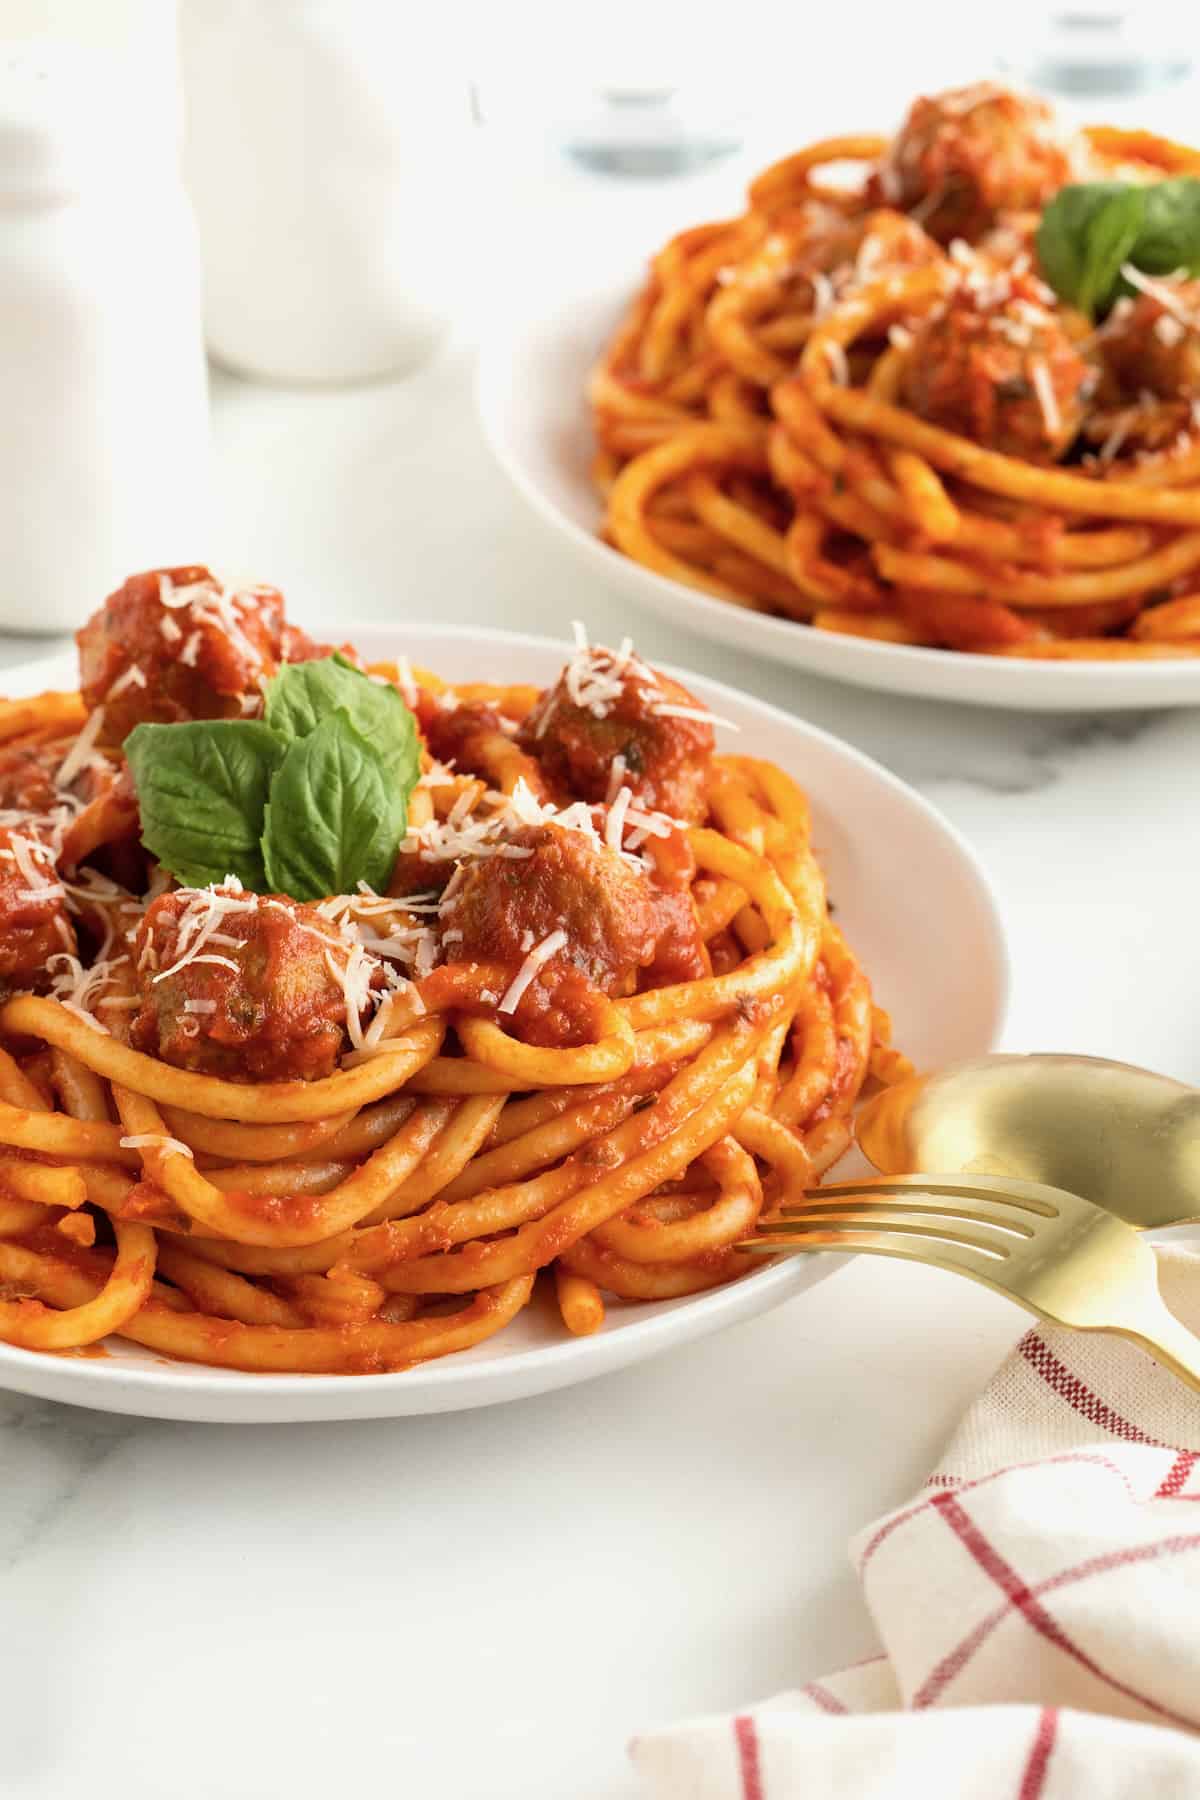 A large white plate with spaghetti and meatballs. The spaghetti is garnished with three fresh basil leaves.